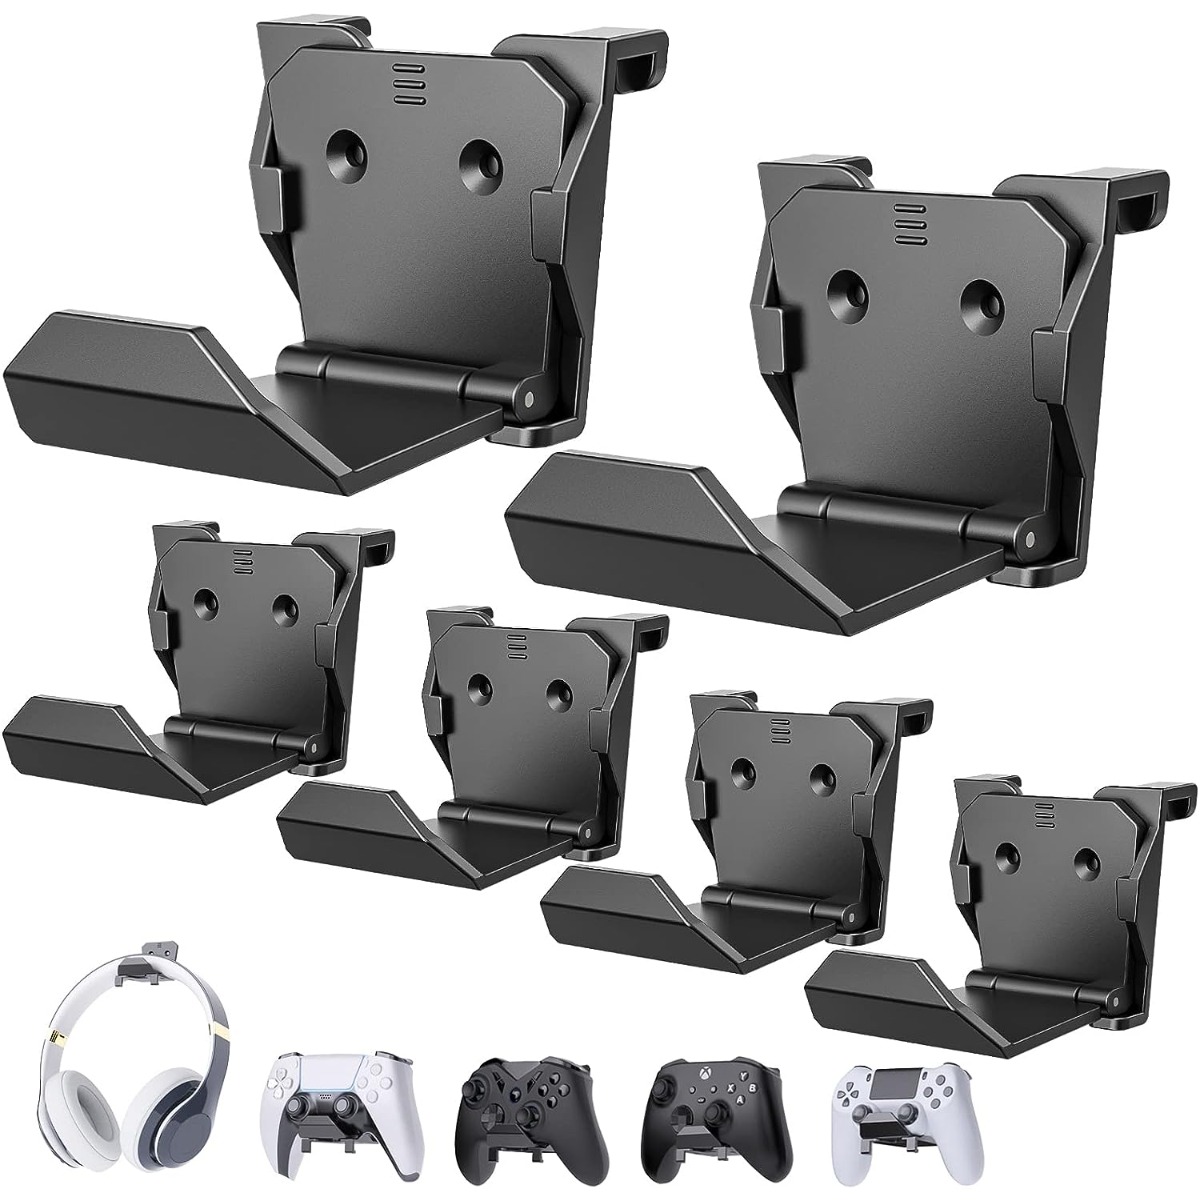 2) - Controller Wall Hanger Mount Stand Holder for Xbox One/PS4/PS5/Switch